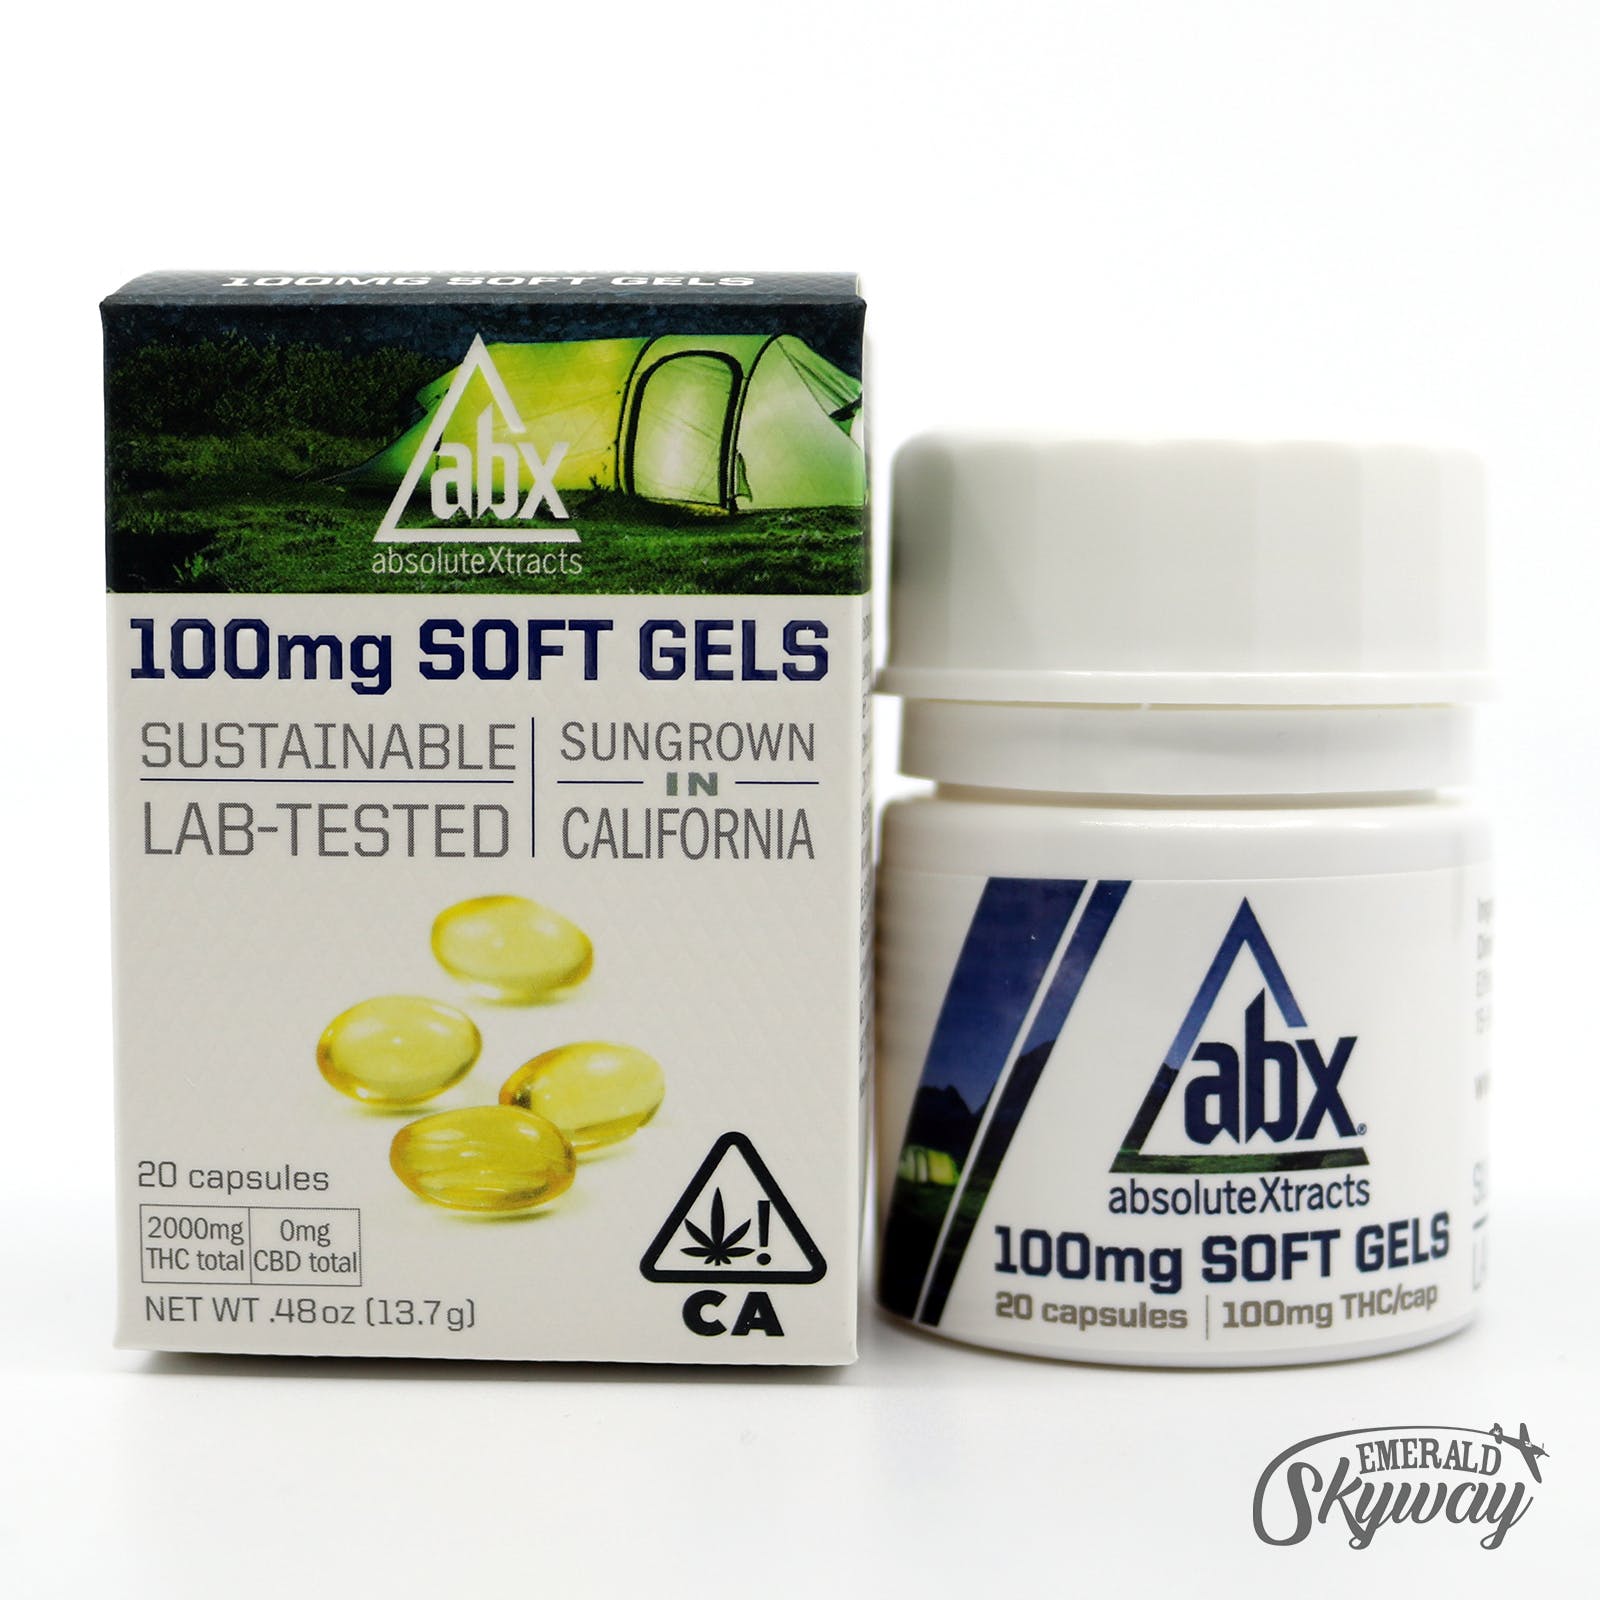 AbsoluteXtracts: 100mg Soft Gels - 20 count *Medical Only*